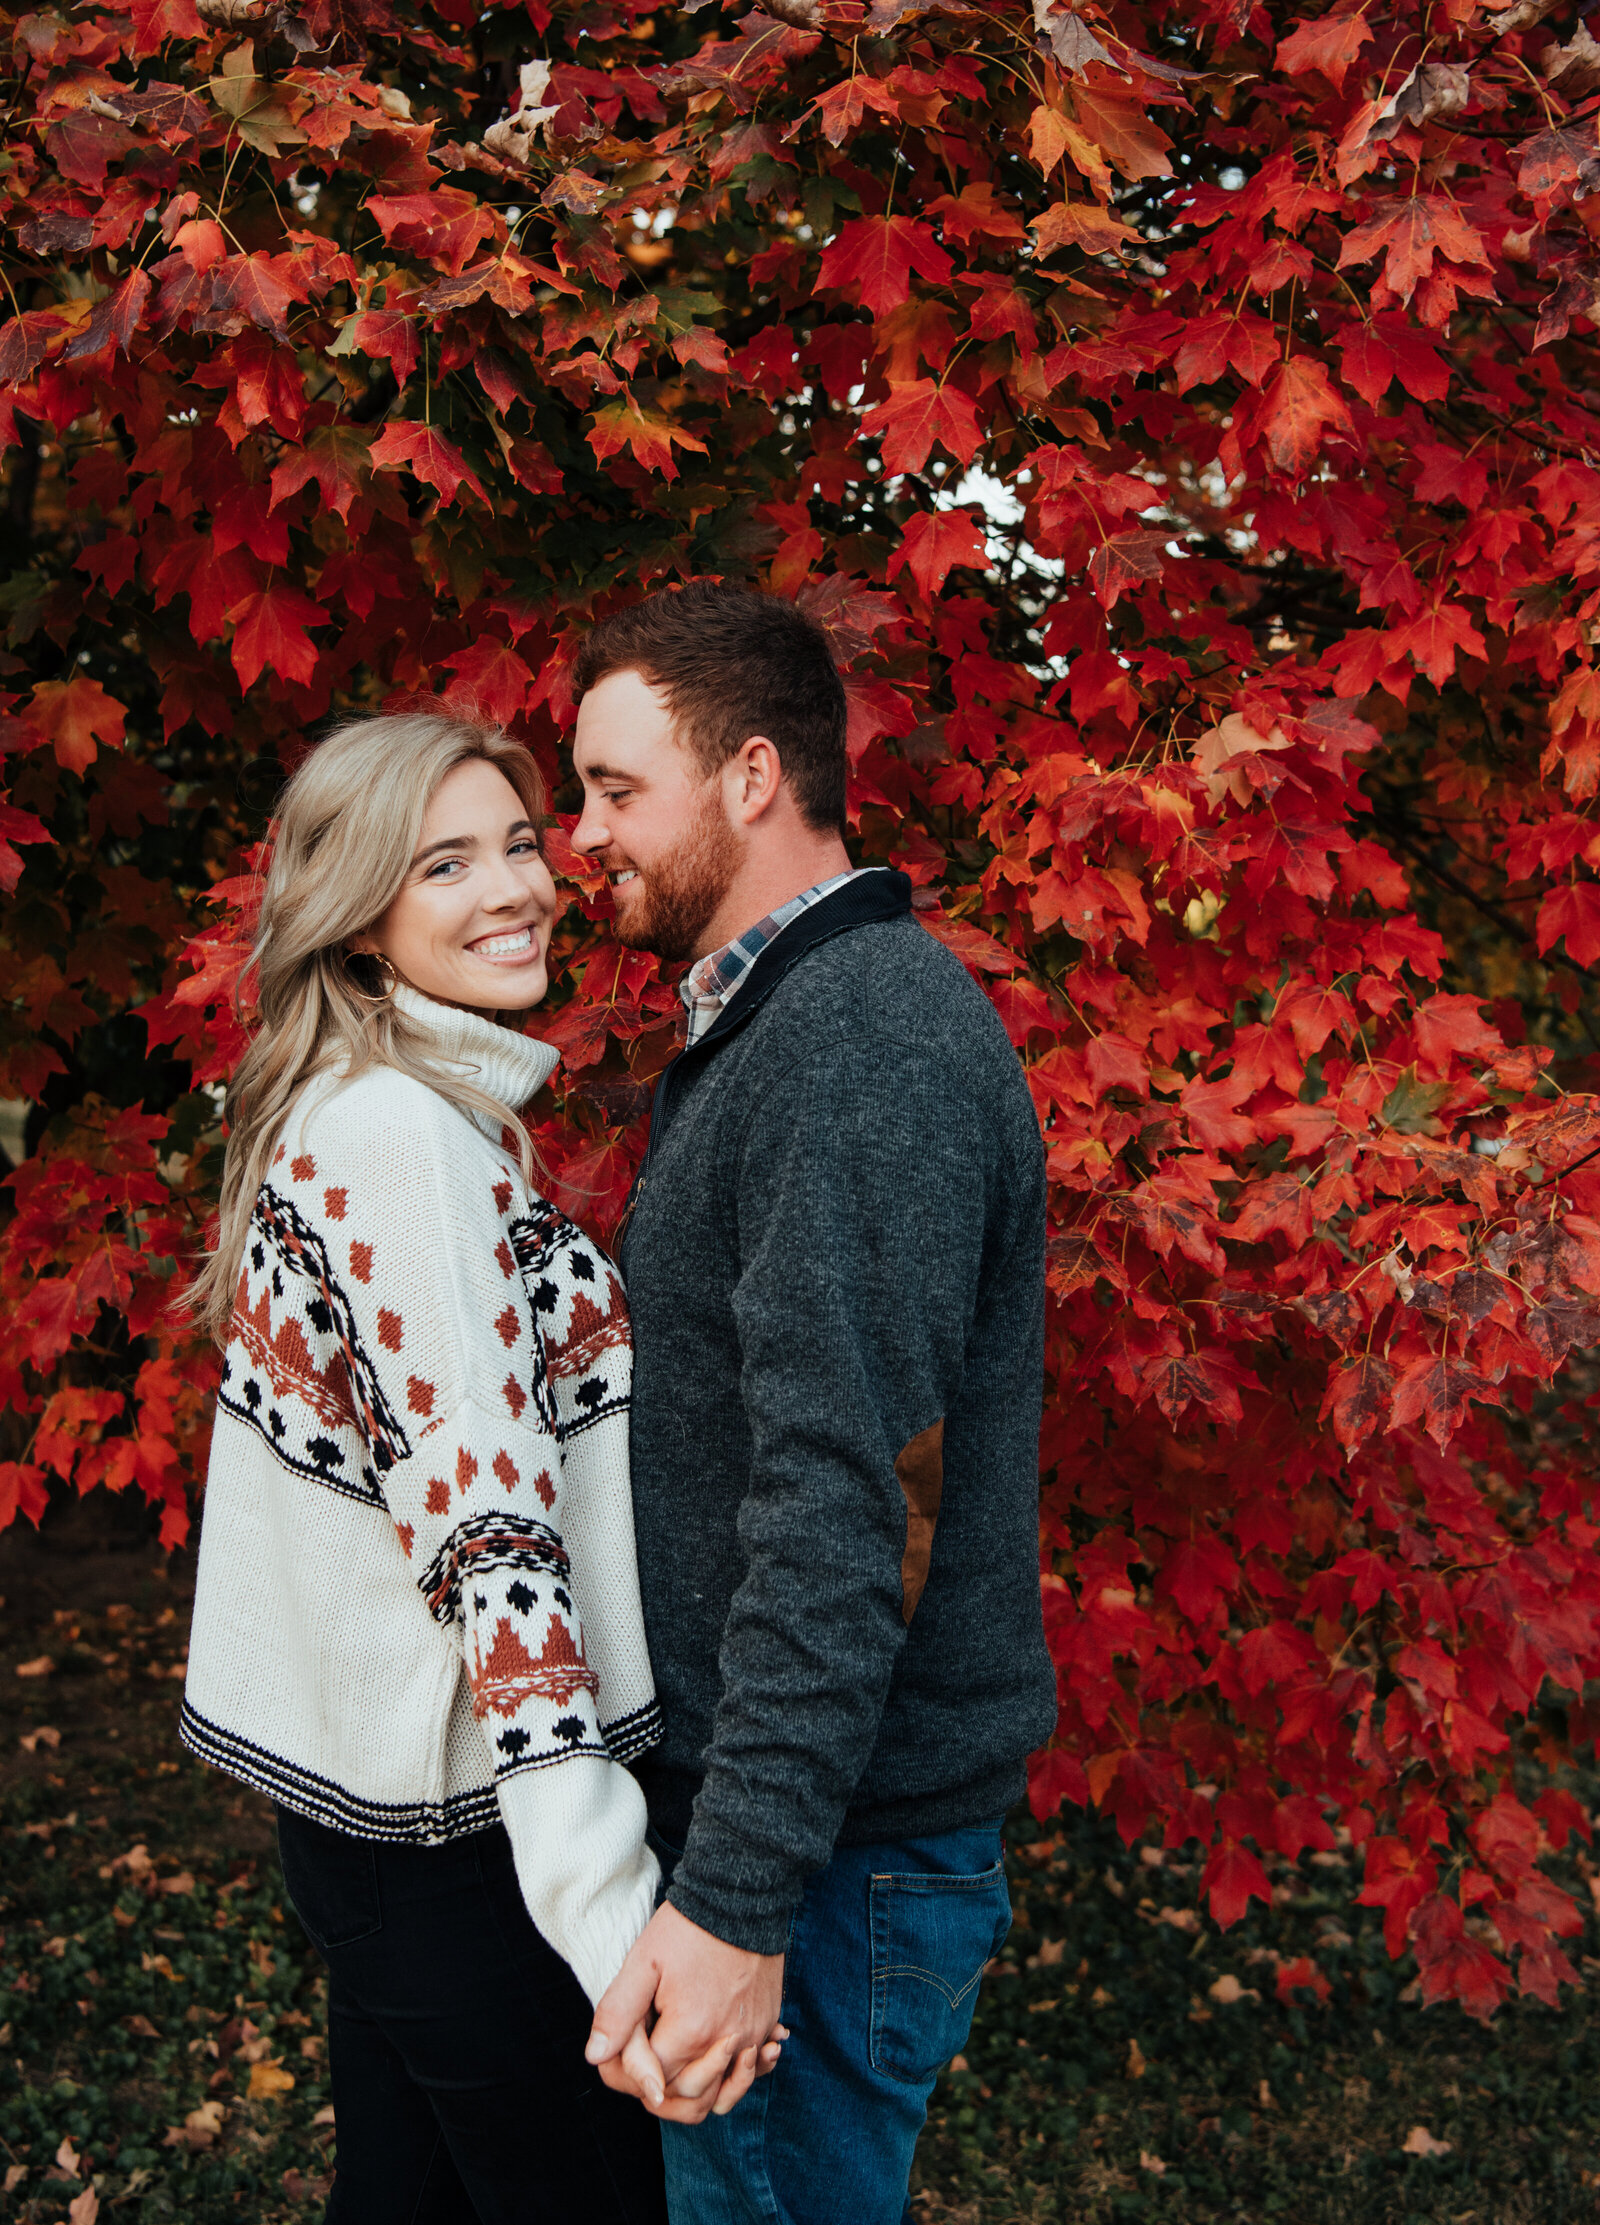 Couple to be married standing infront of autumn leaves